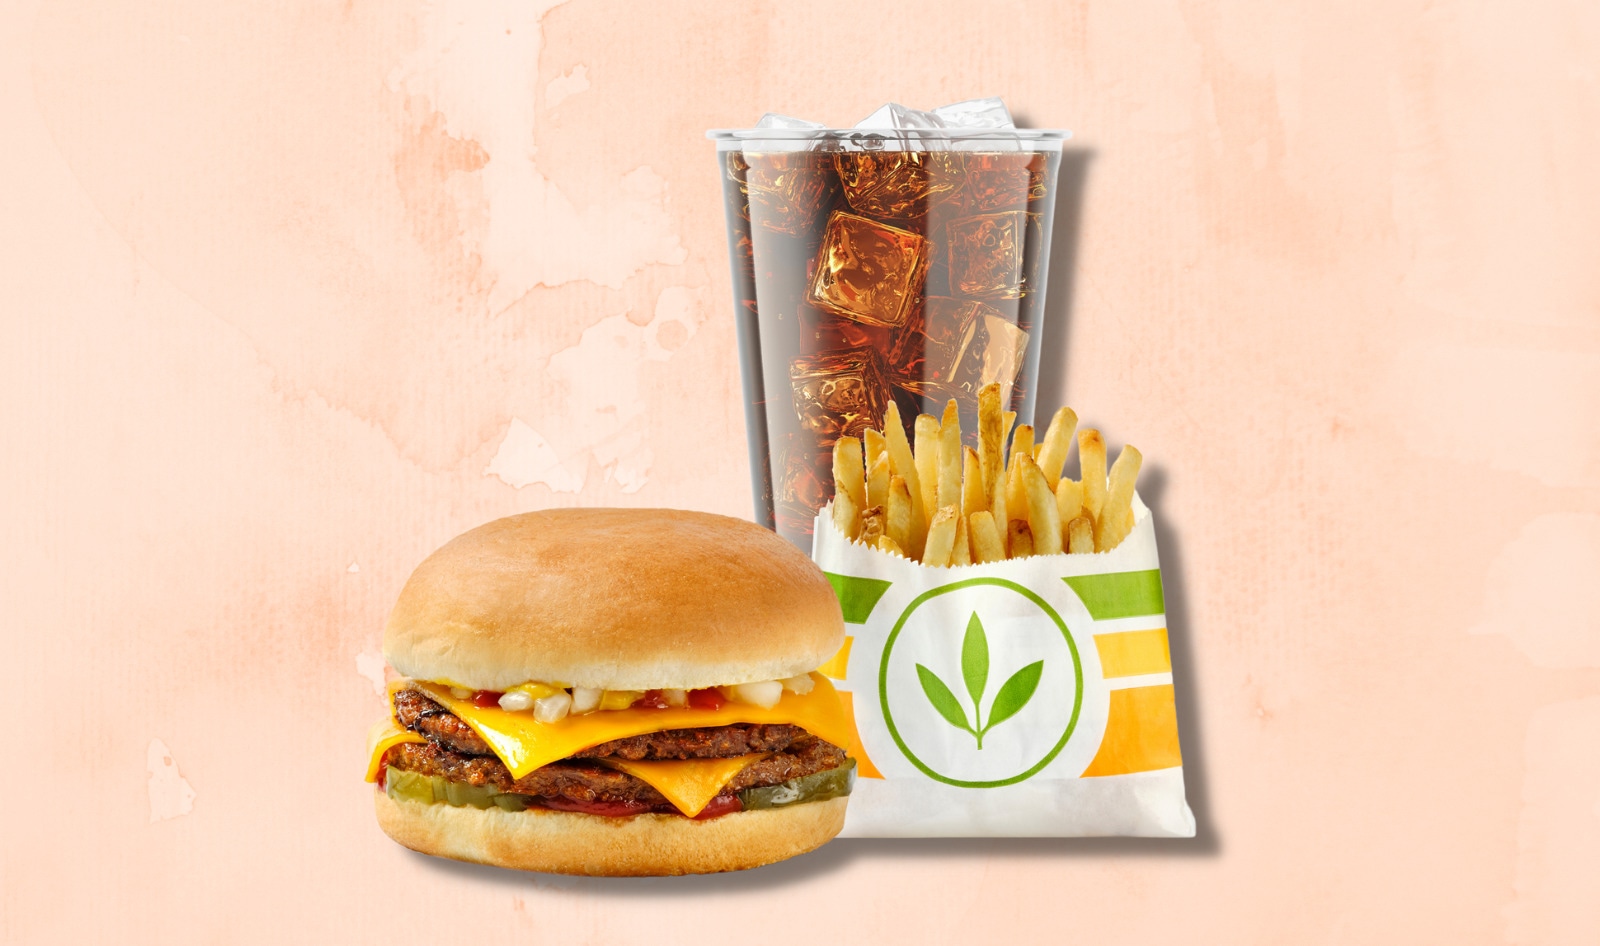 This Vegan Fast-Food Chain's Burgers Just Got 38 Percent Cheaper to Compete With McDonald's and Burger King